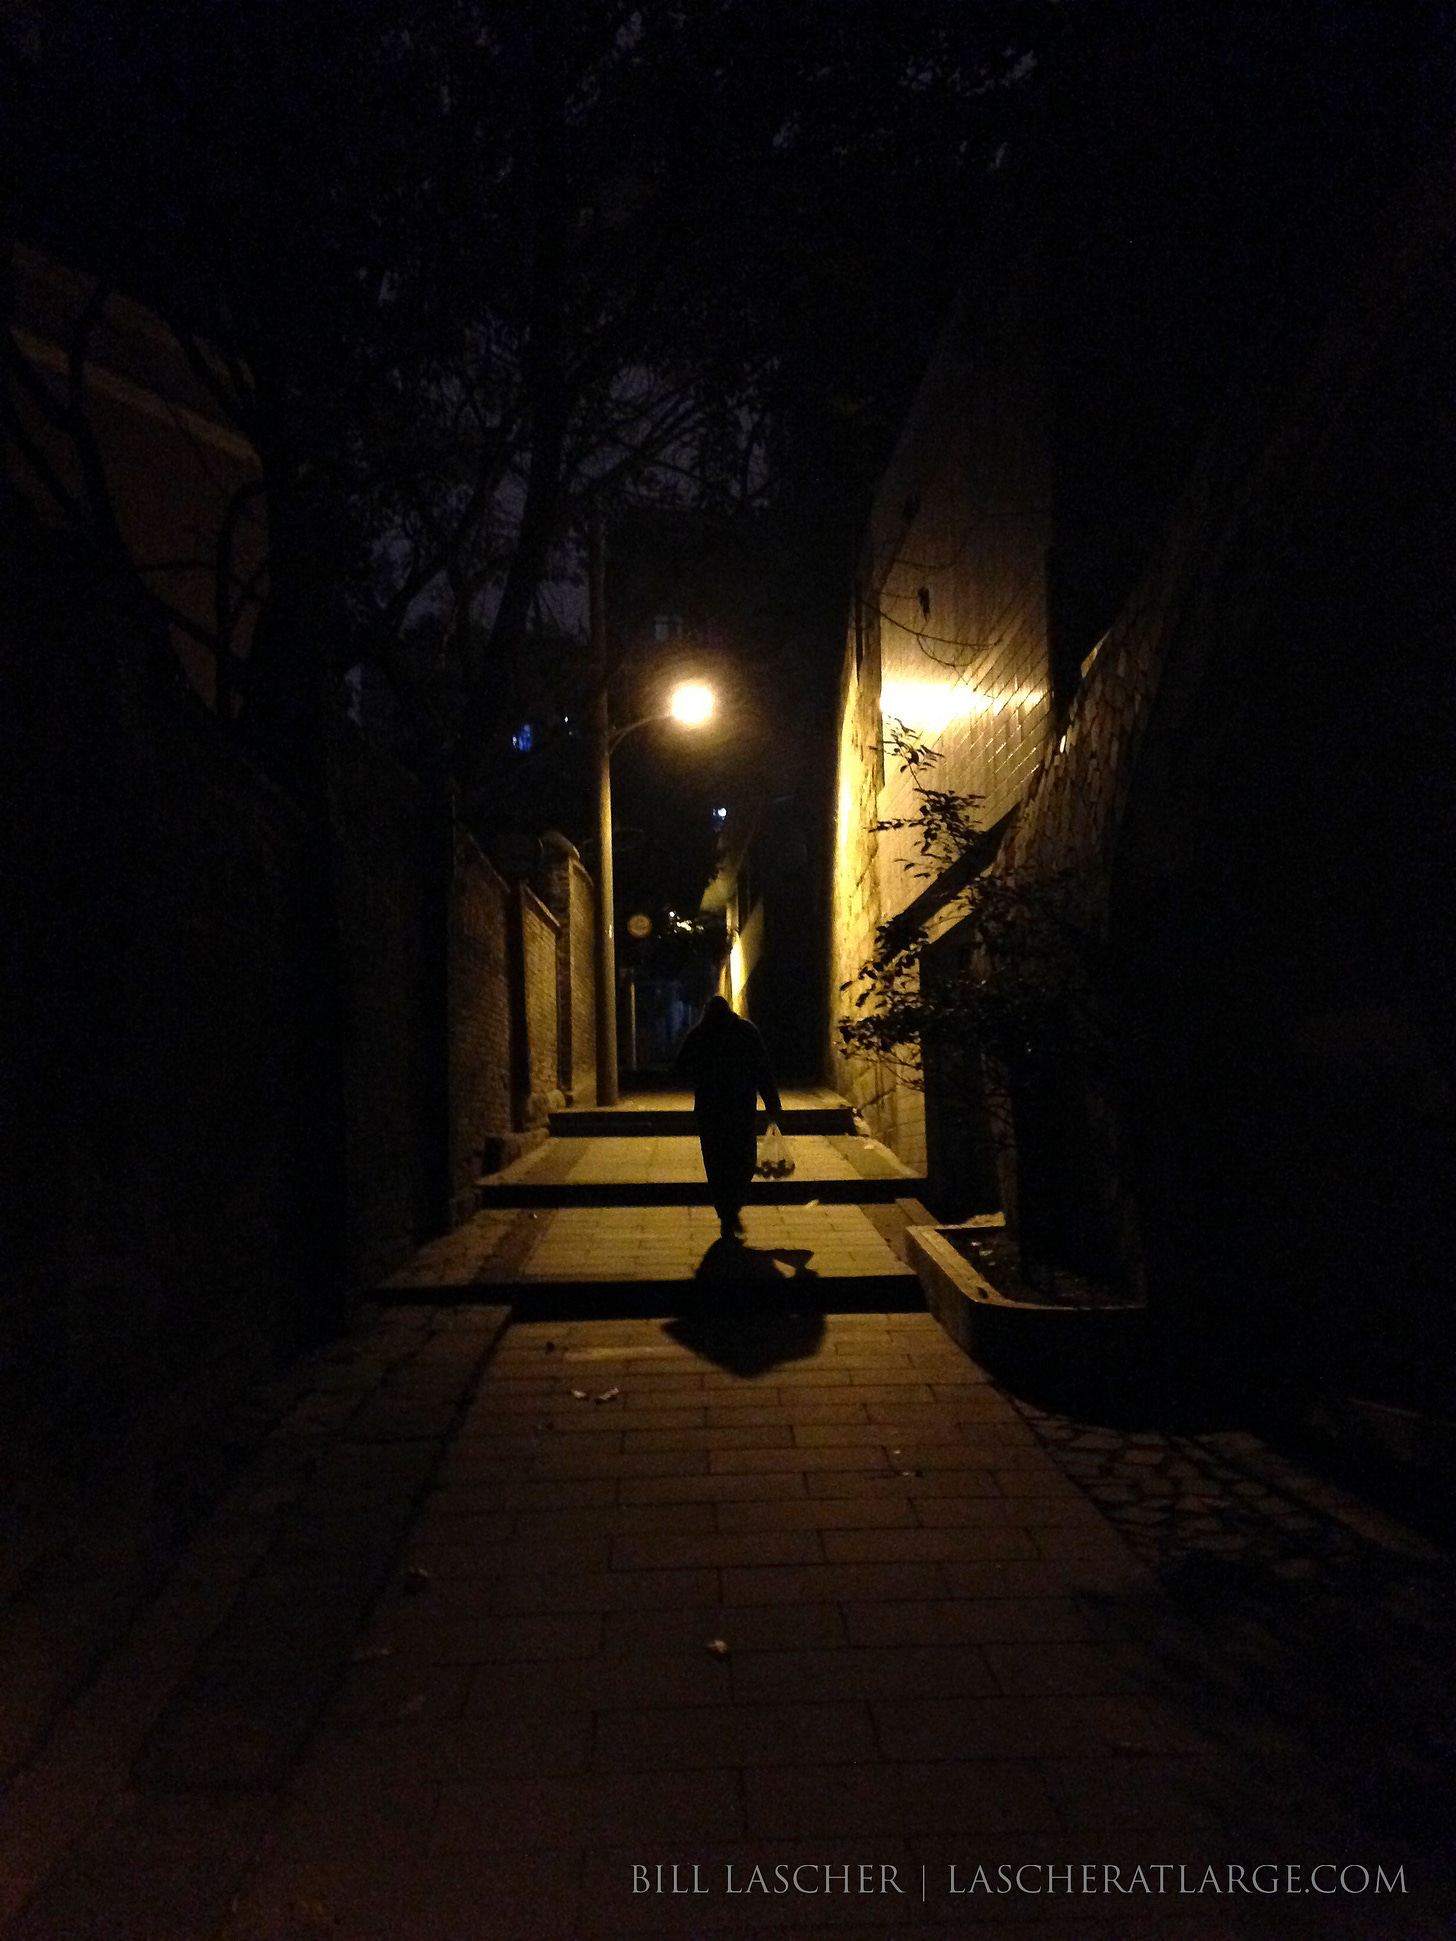 A lone streetlamp illuminates the pavement and walls of an alleyway in Chongqing China. A figure at the center walks in silhouette up one of three low stone steps on the ground. The person carries a bag of what appears to be fruit in one hand, and the person's shadow trails behind at the center of the image, which fades to black on all sides just beyond the figure.